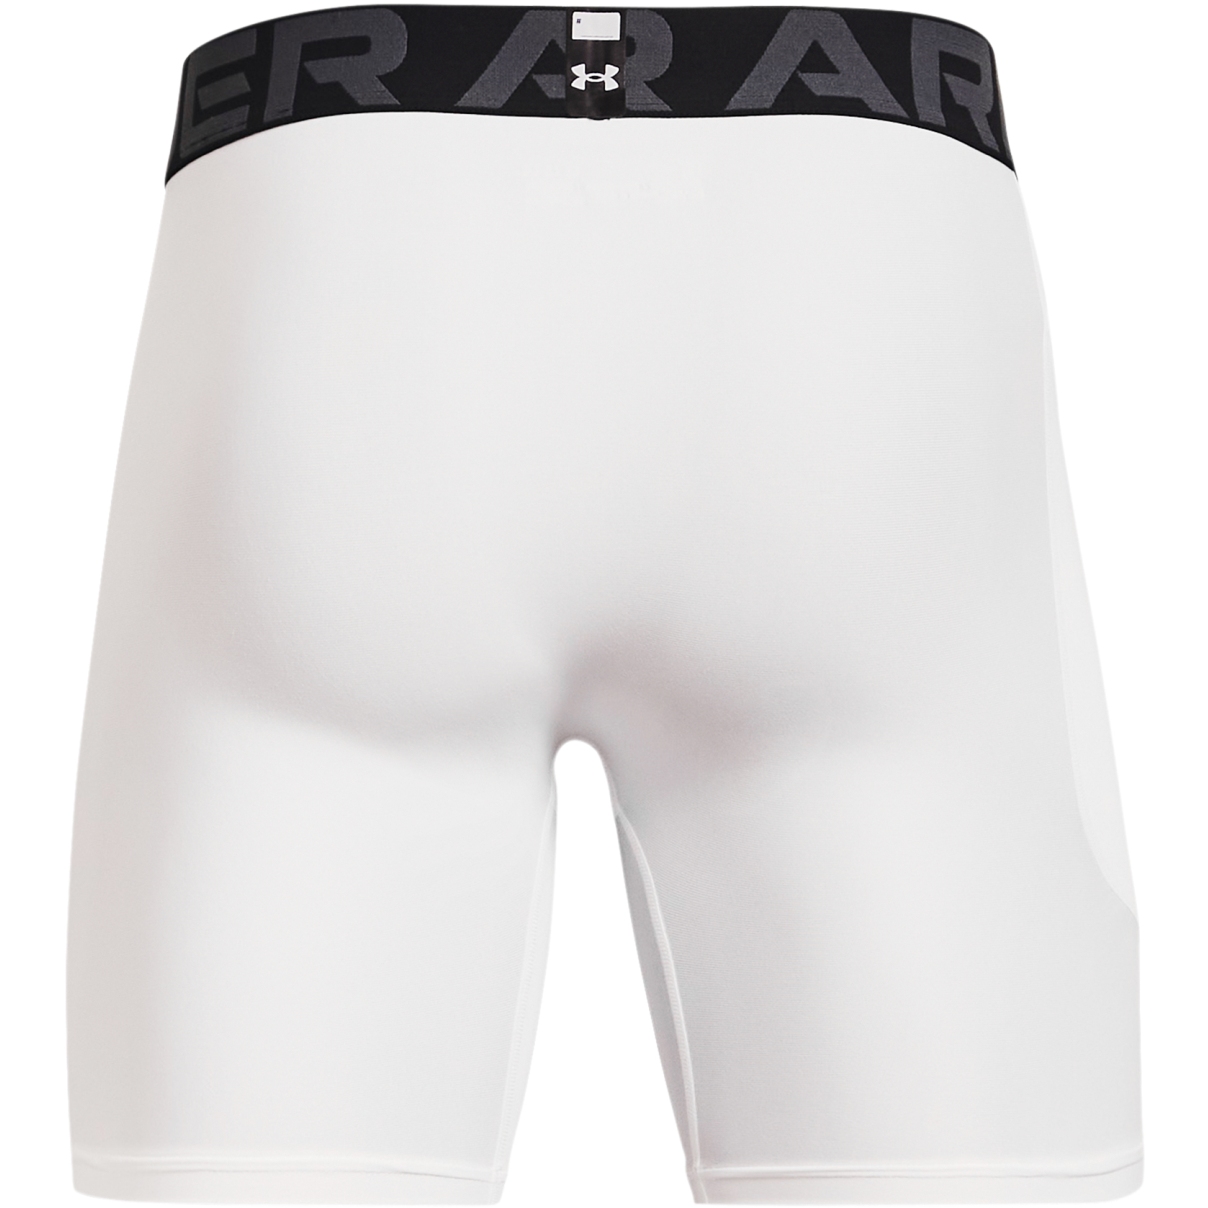 Under Armour Heat Gear Armour 2.0 Compression Shorts Mens Size